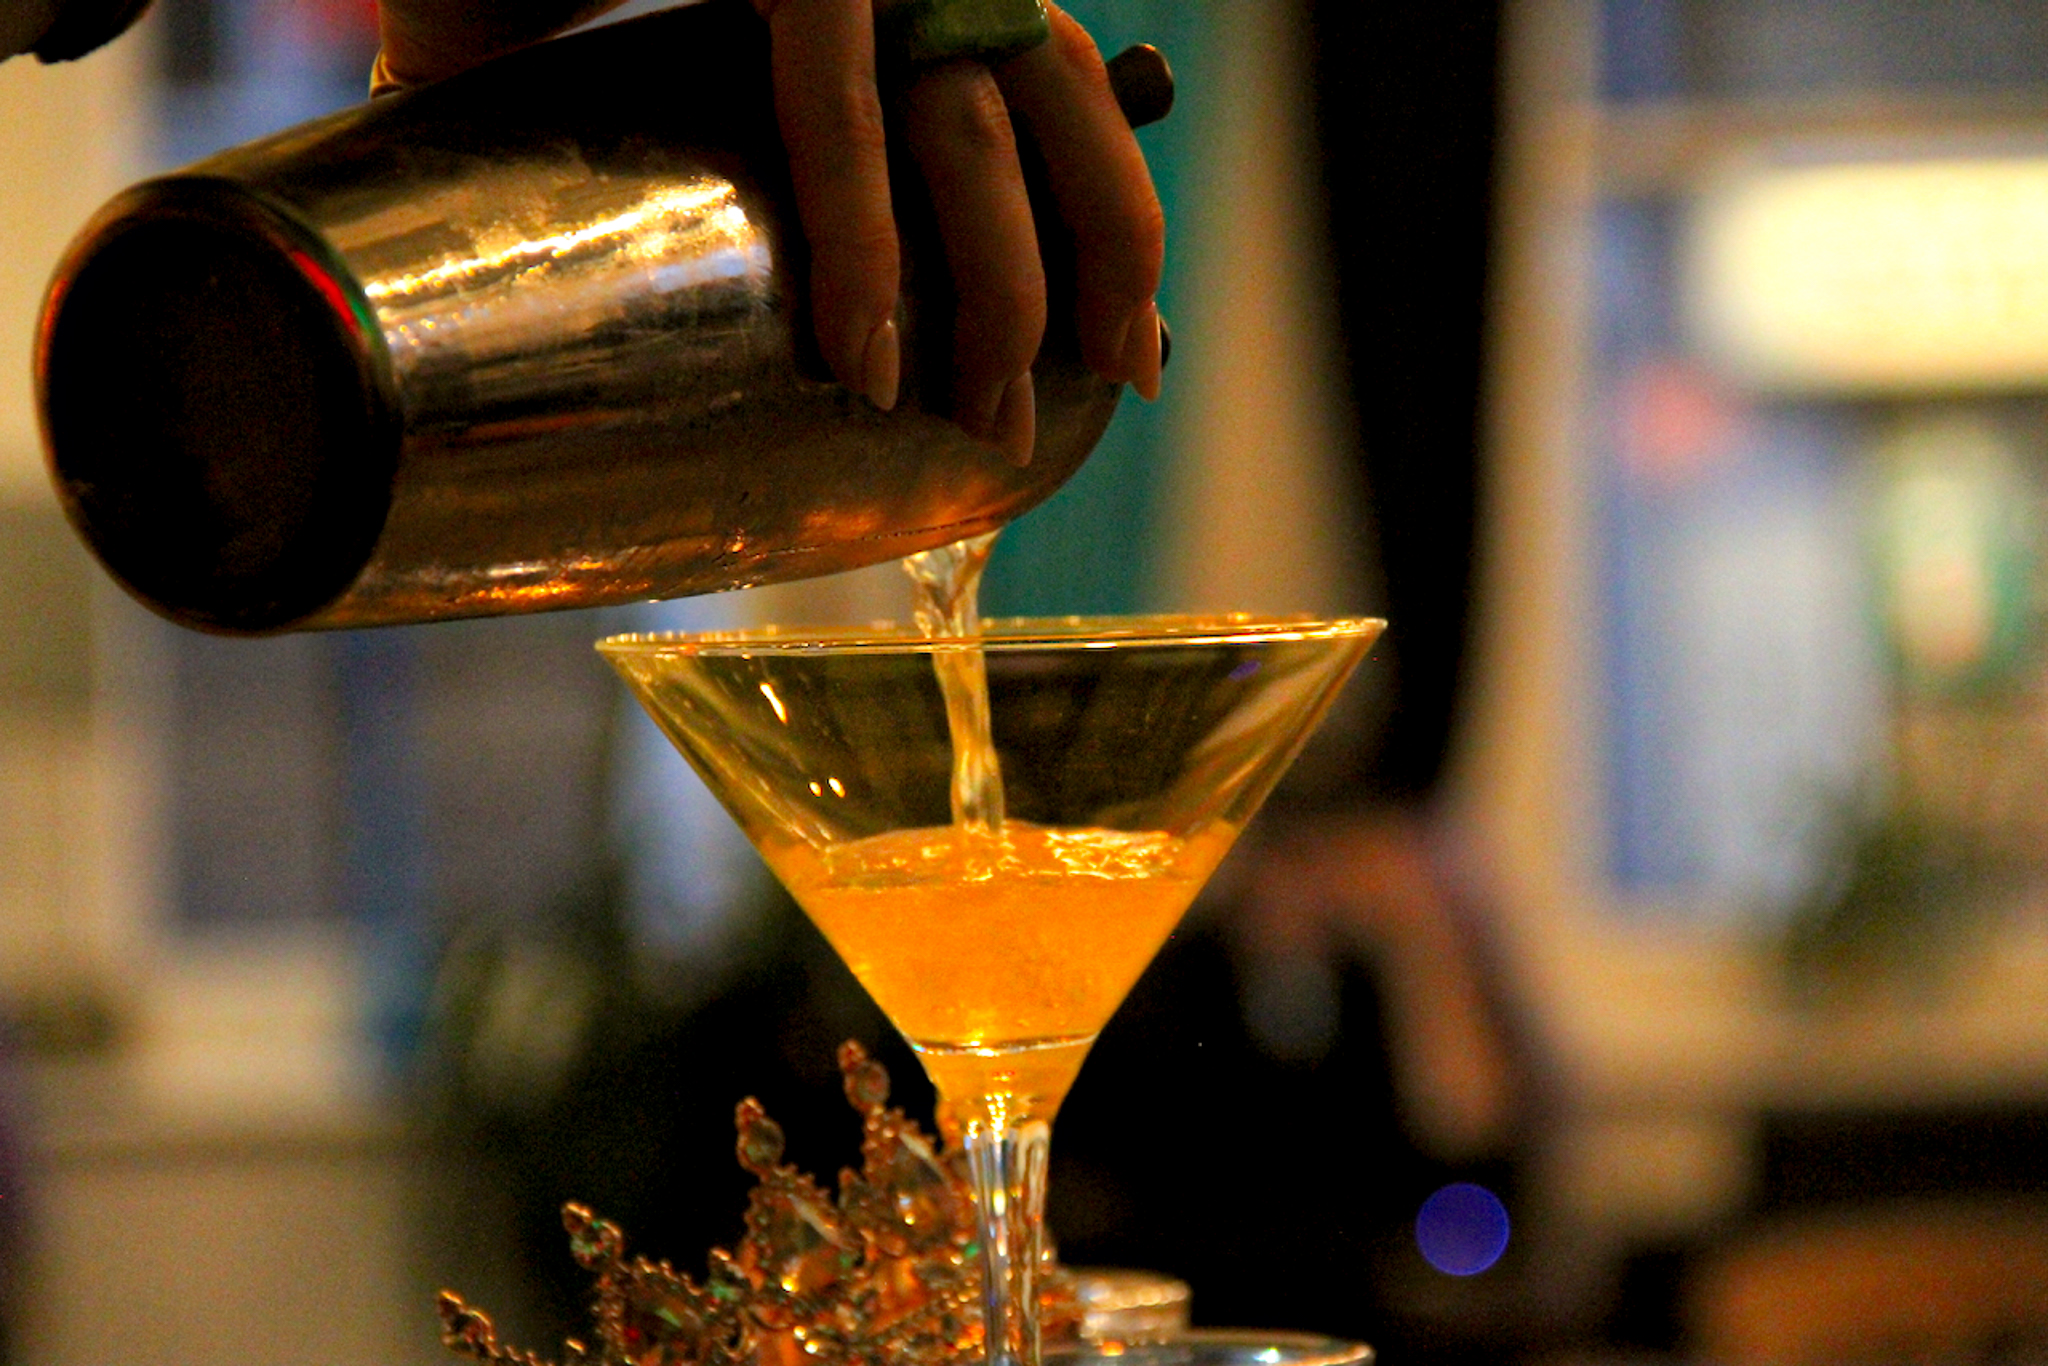 A photograph of The Crown cocktail being poured into a glass as part of the cocktail recipe blog.